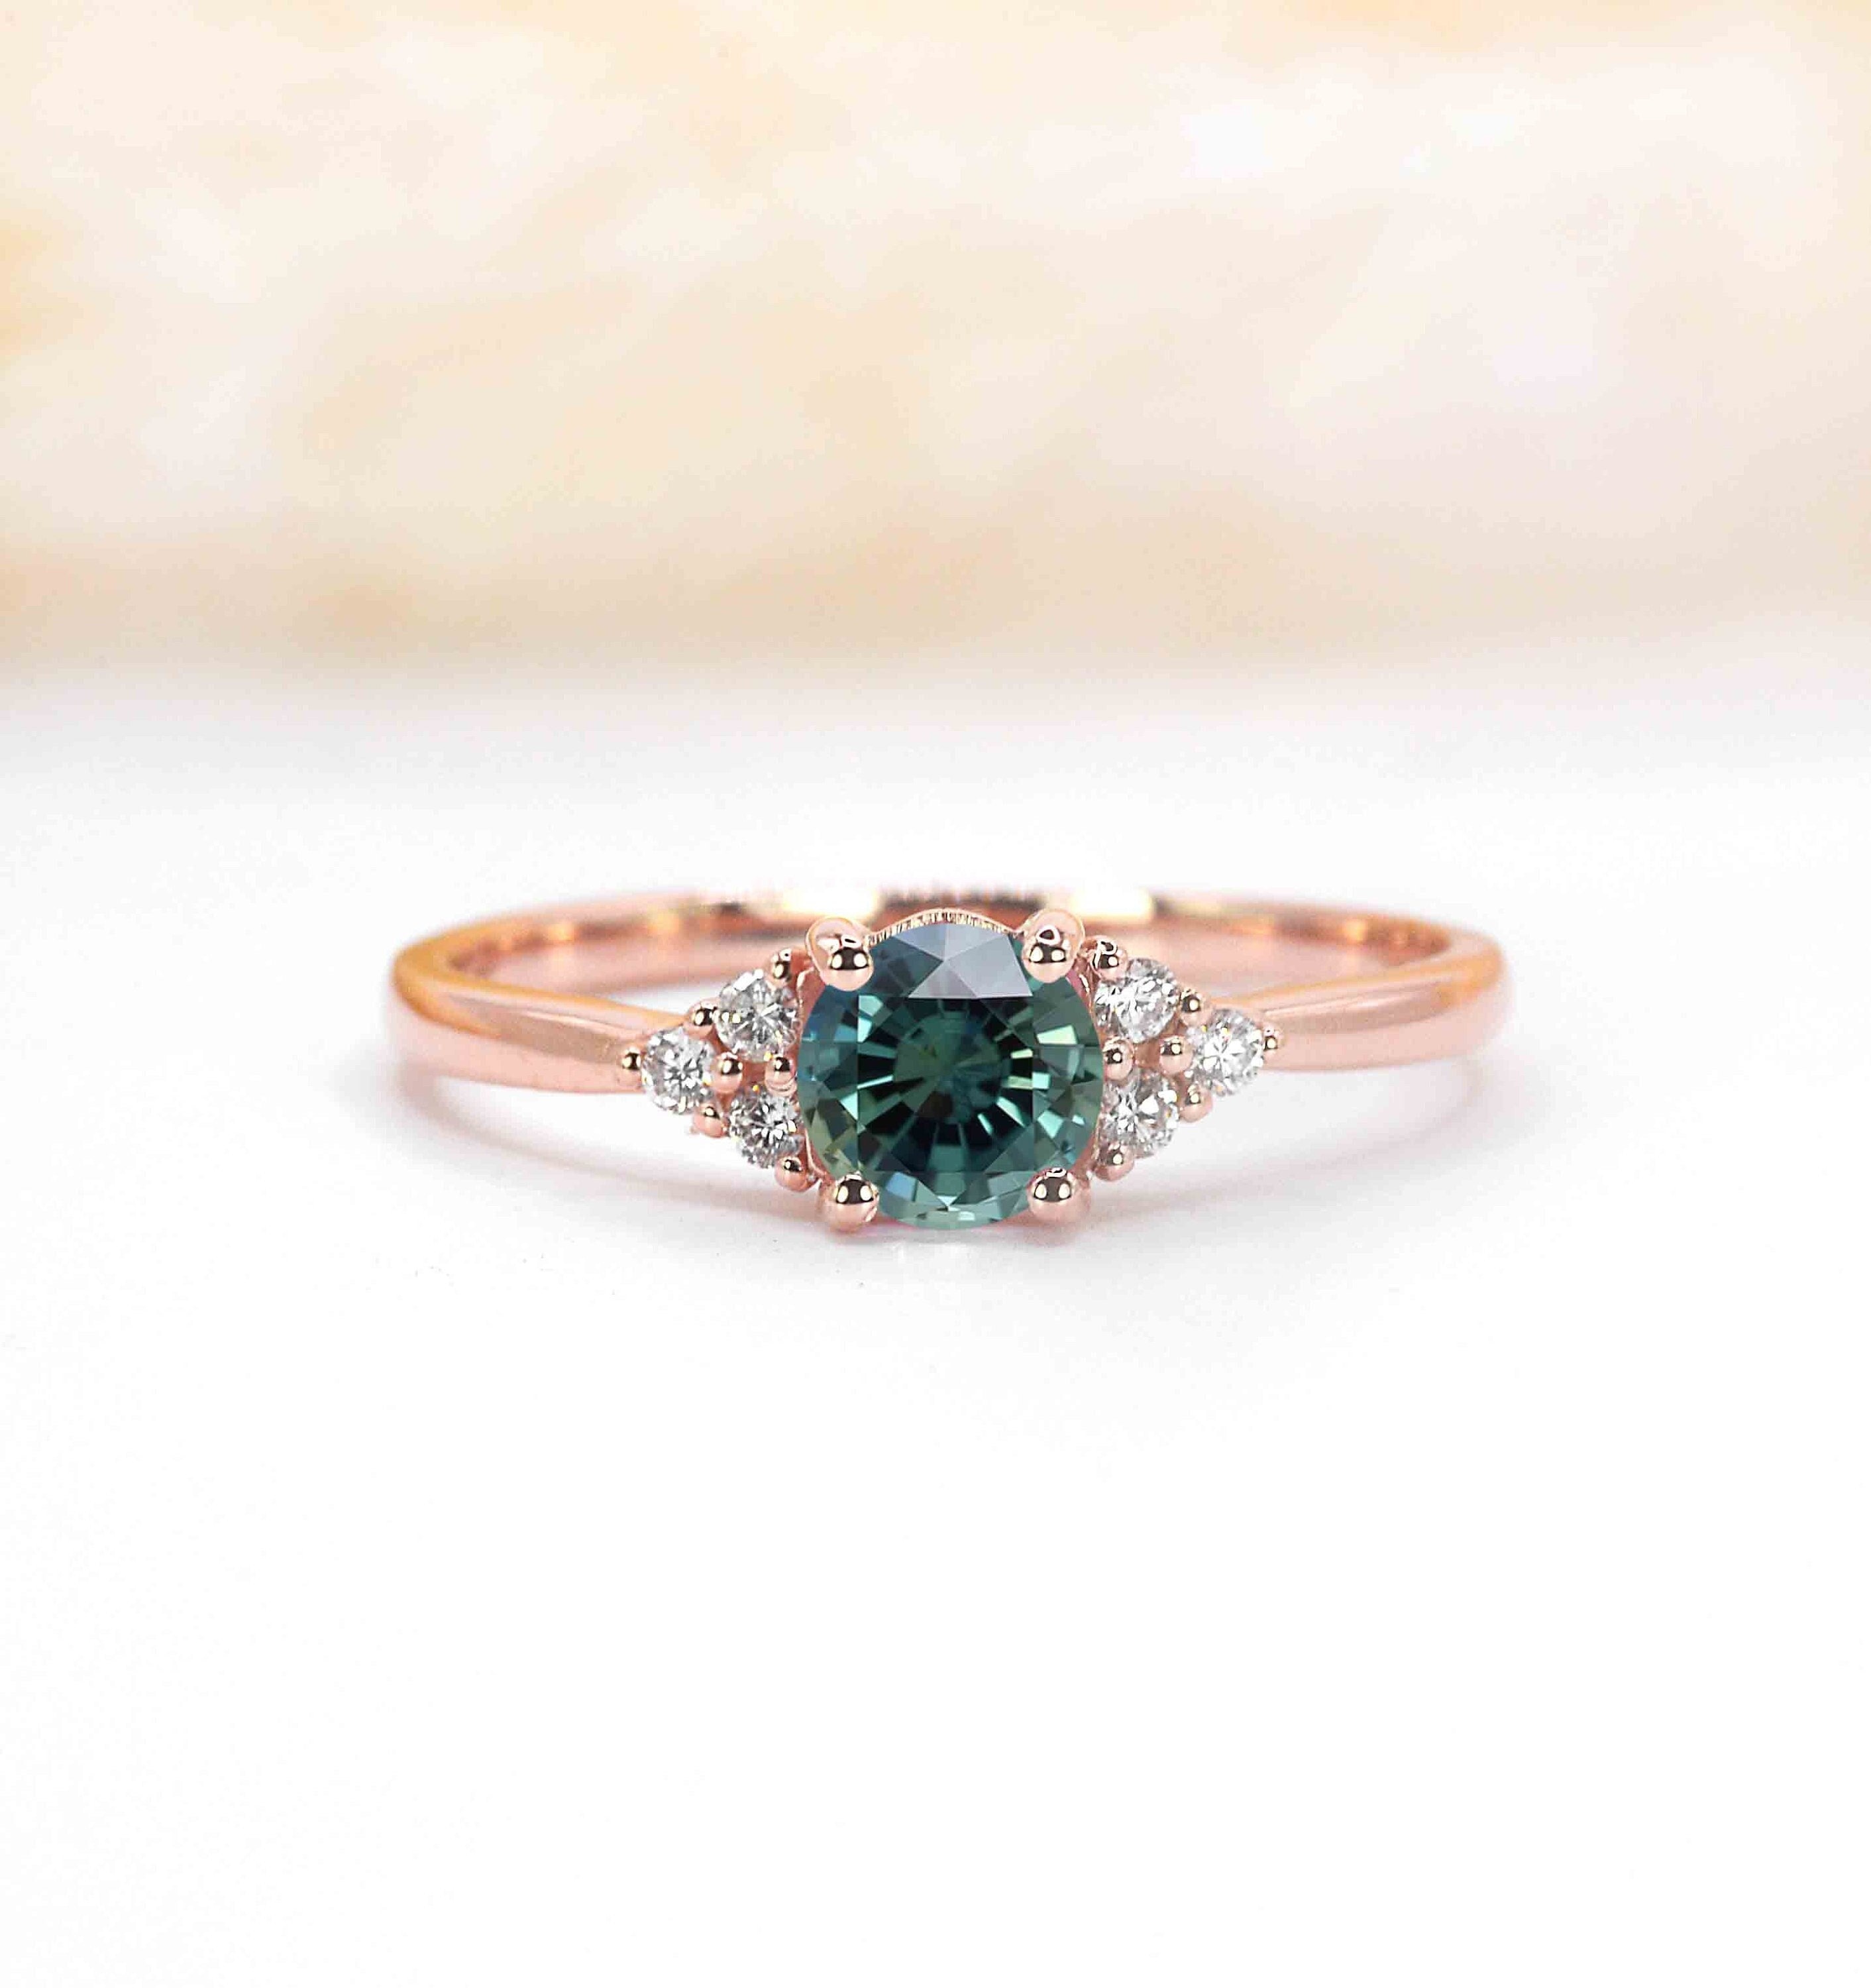 Natural Round Teal Sapphire Engagement Ring | Art Deco & Diamond Solid Rose, Yellow, White Gold Or Platinum Handmade